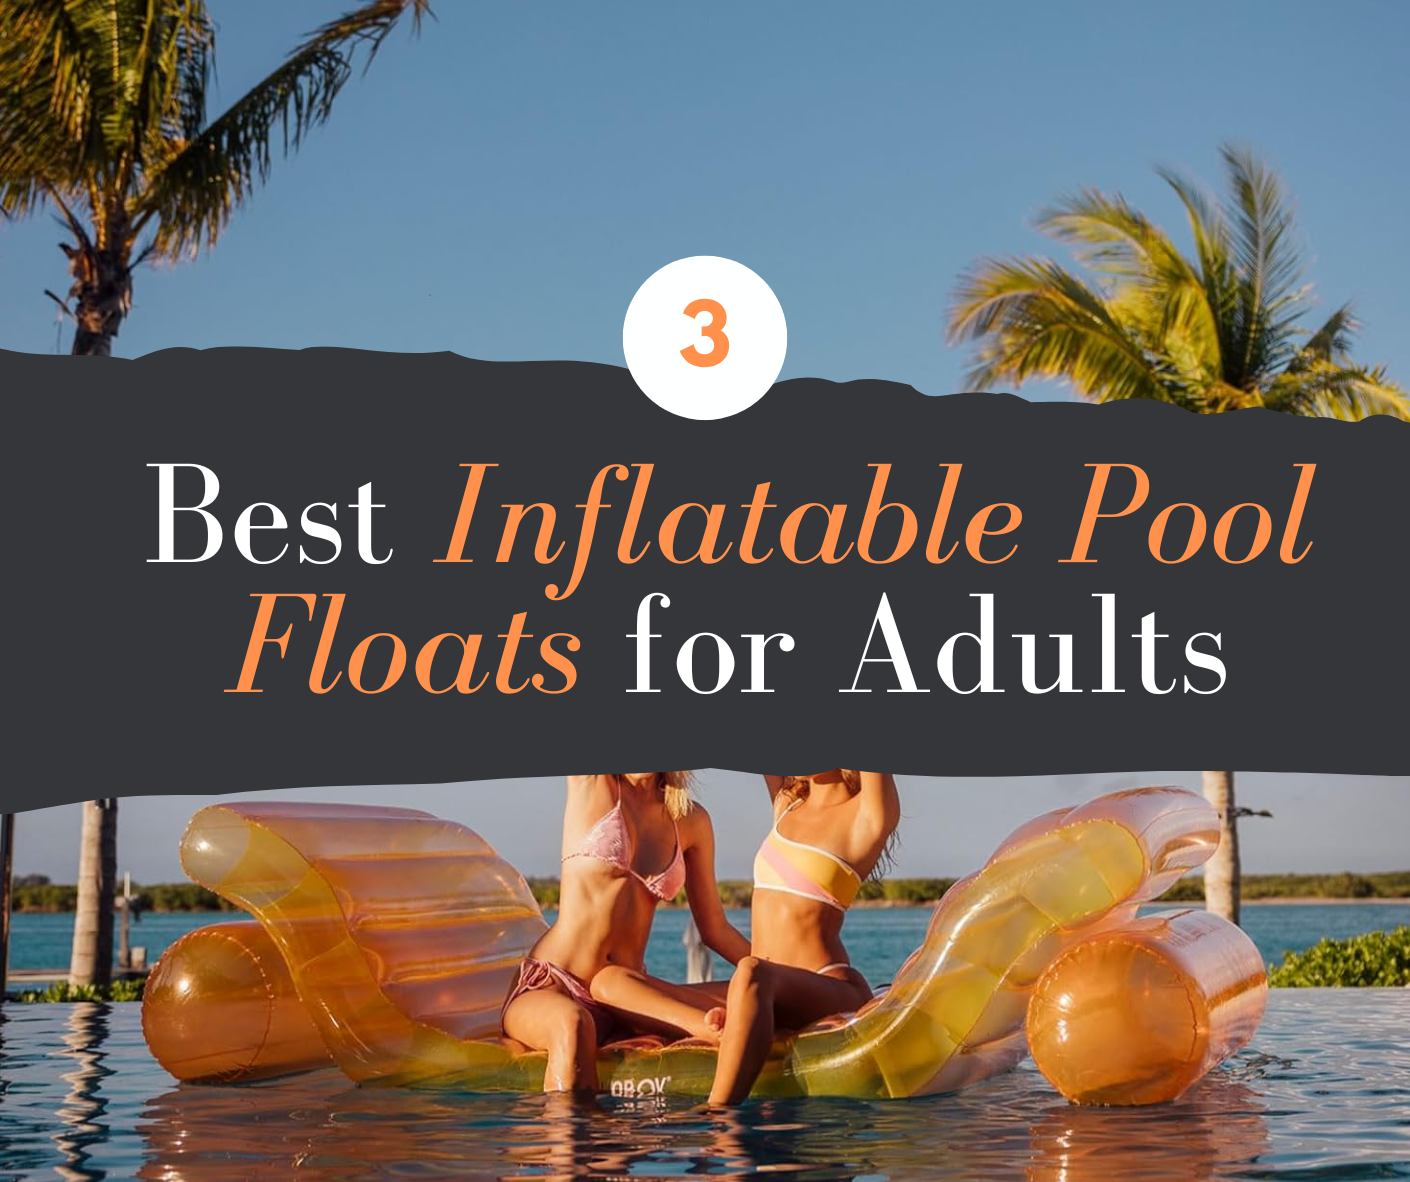 3 Best Inflatable Pool Floats for Adults